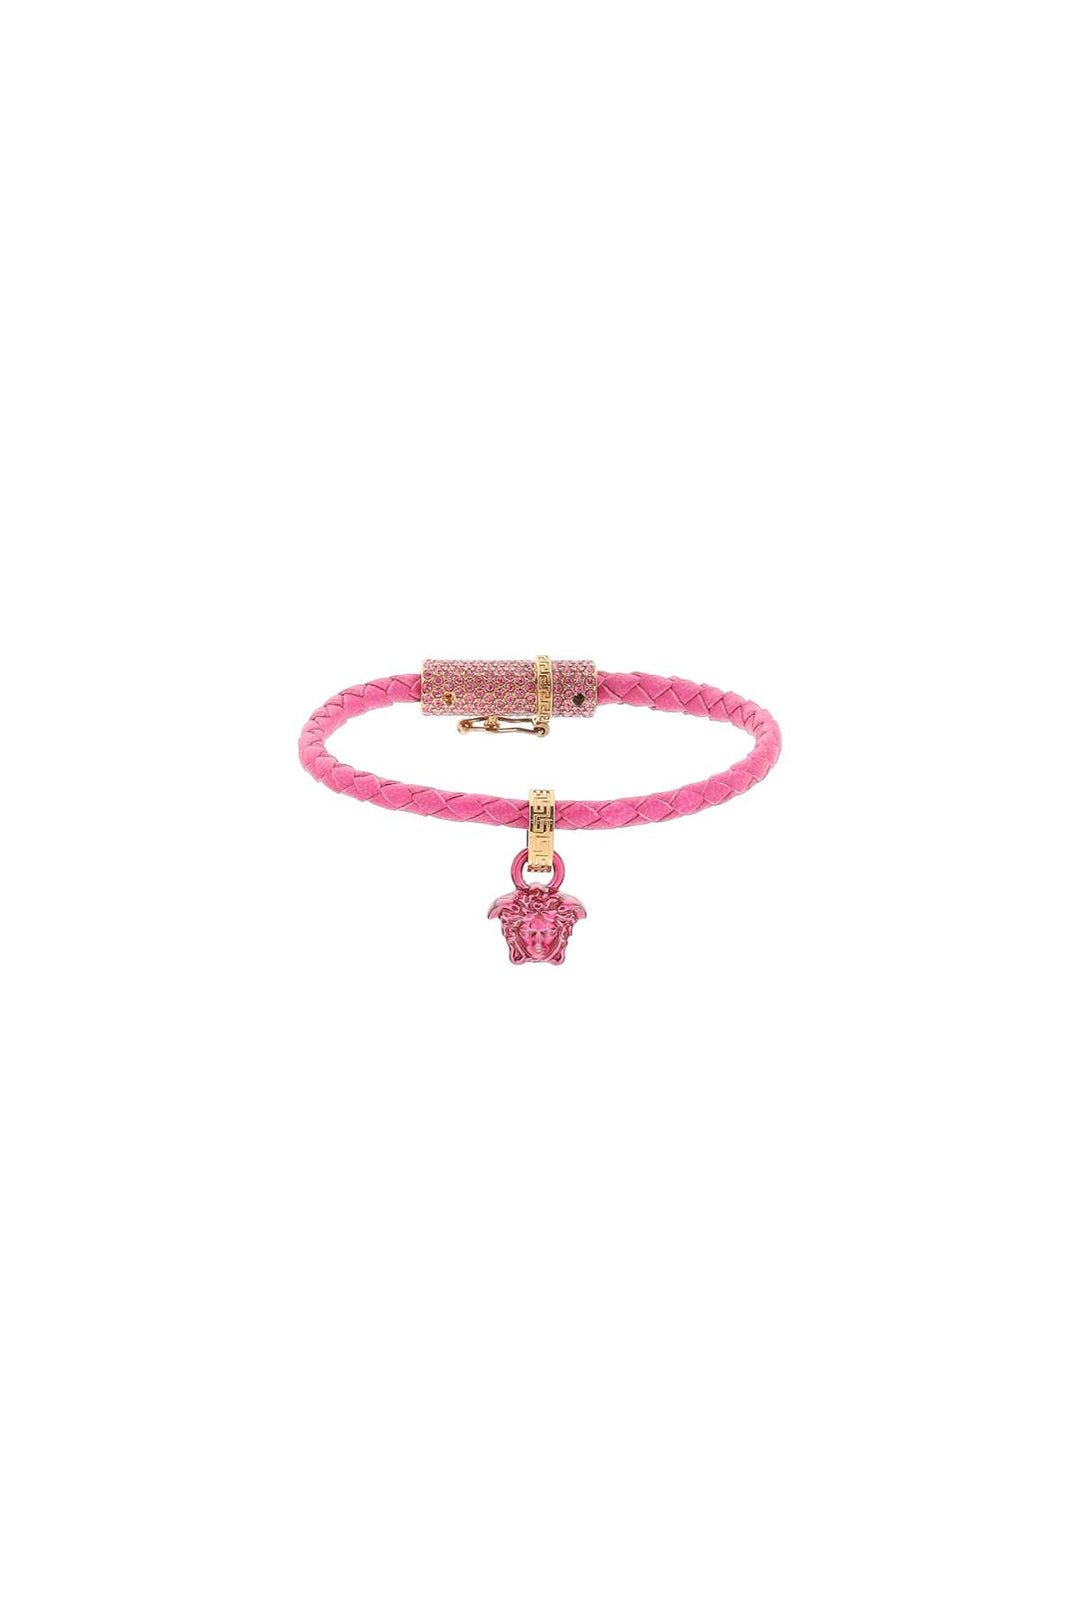 Versace Braided Leather Bracelet   Fuxia